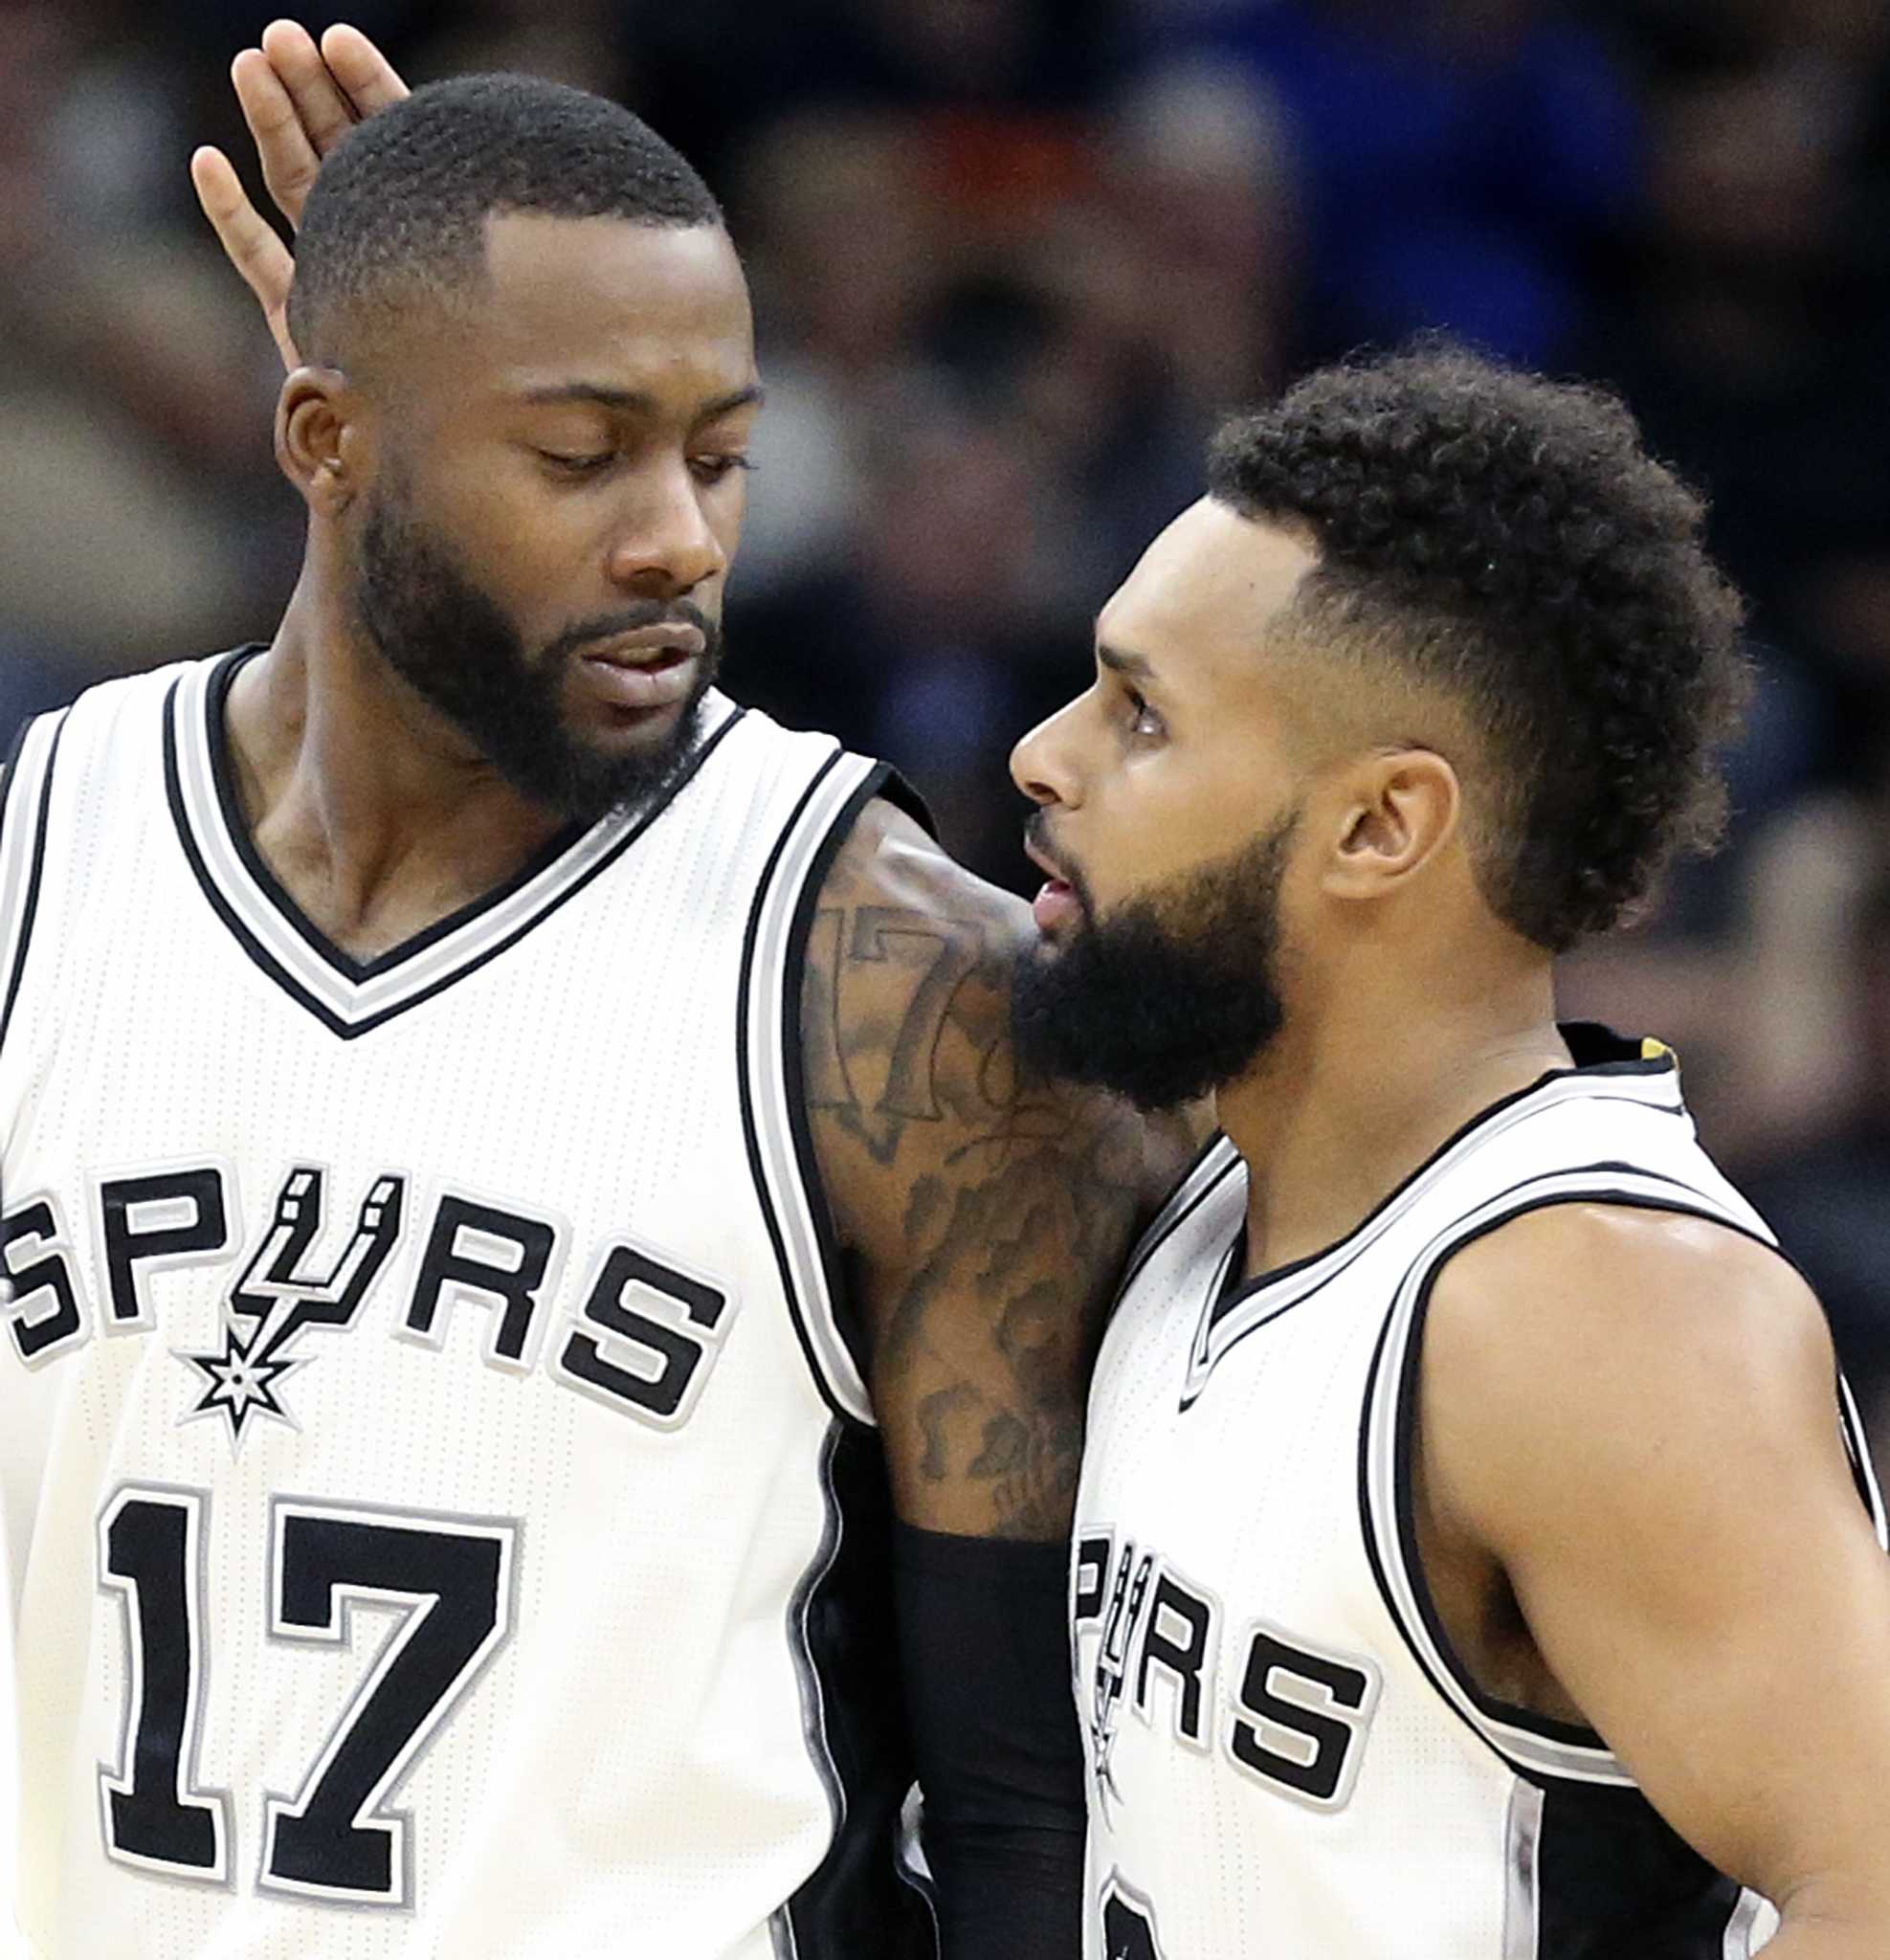 The Spurs are at a crossroad with Patty Mills